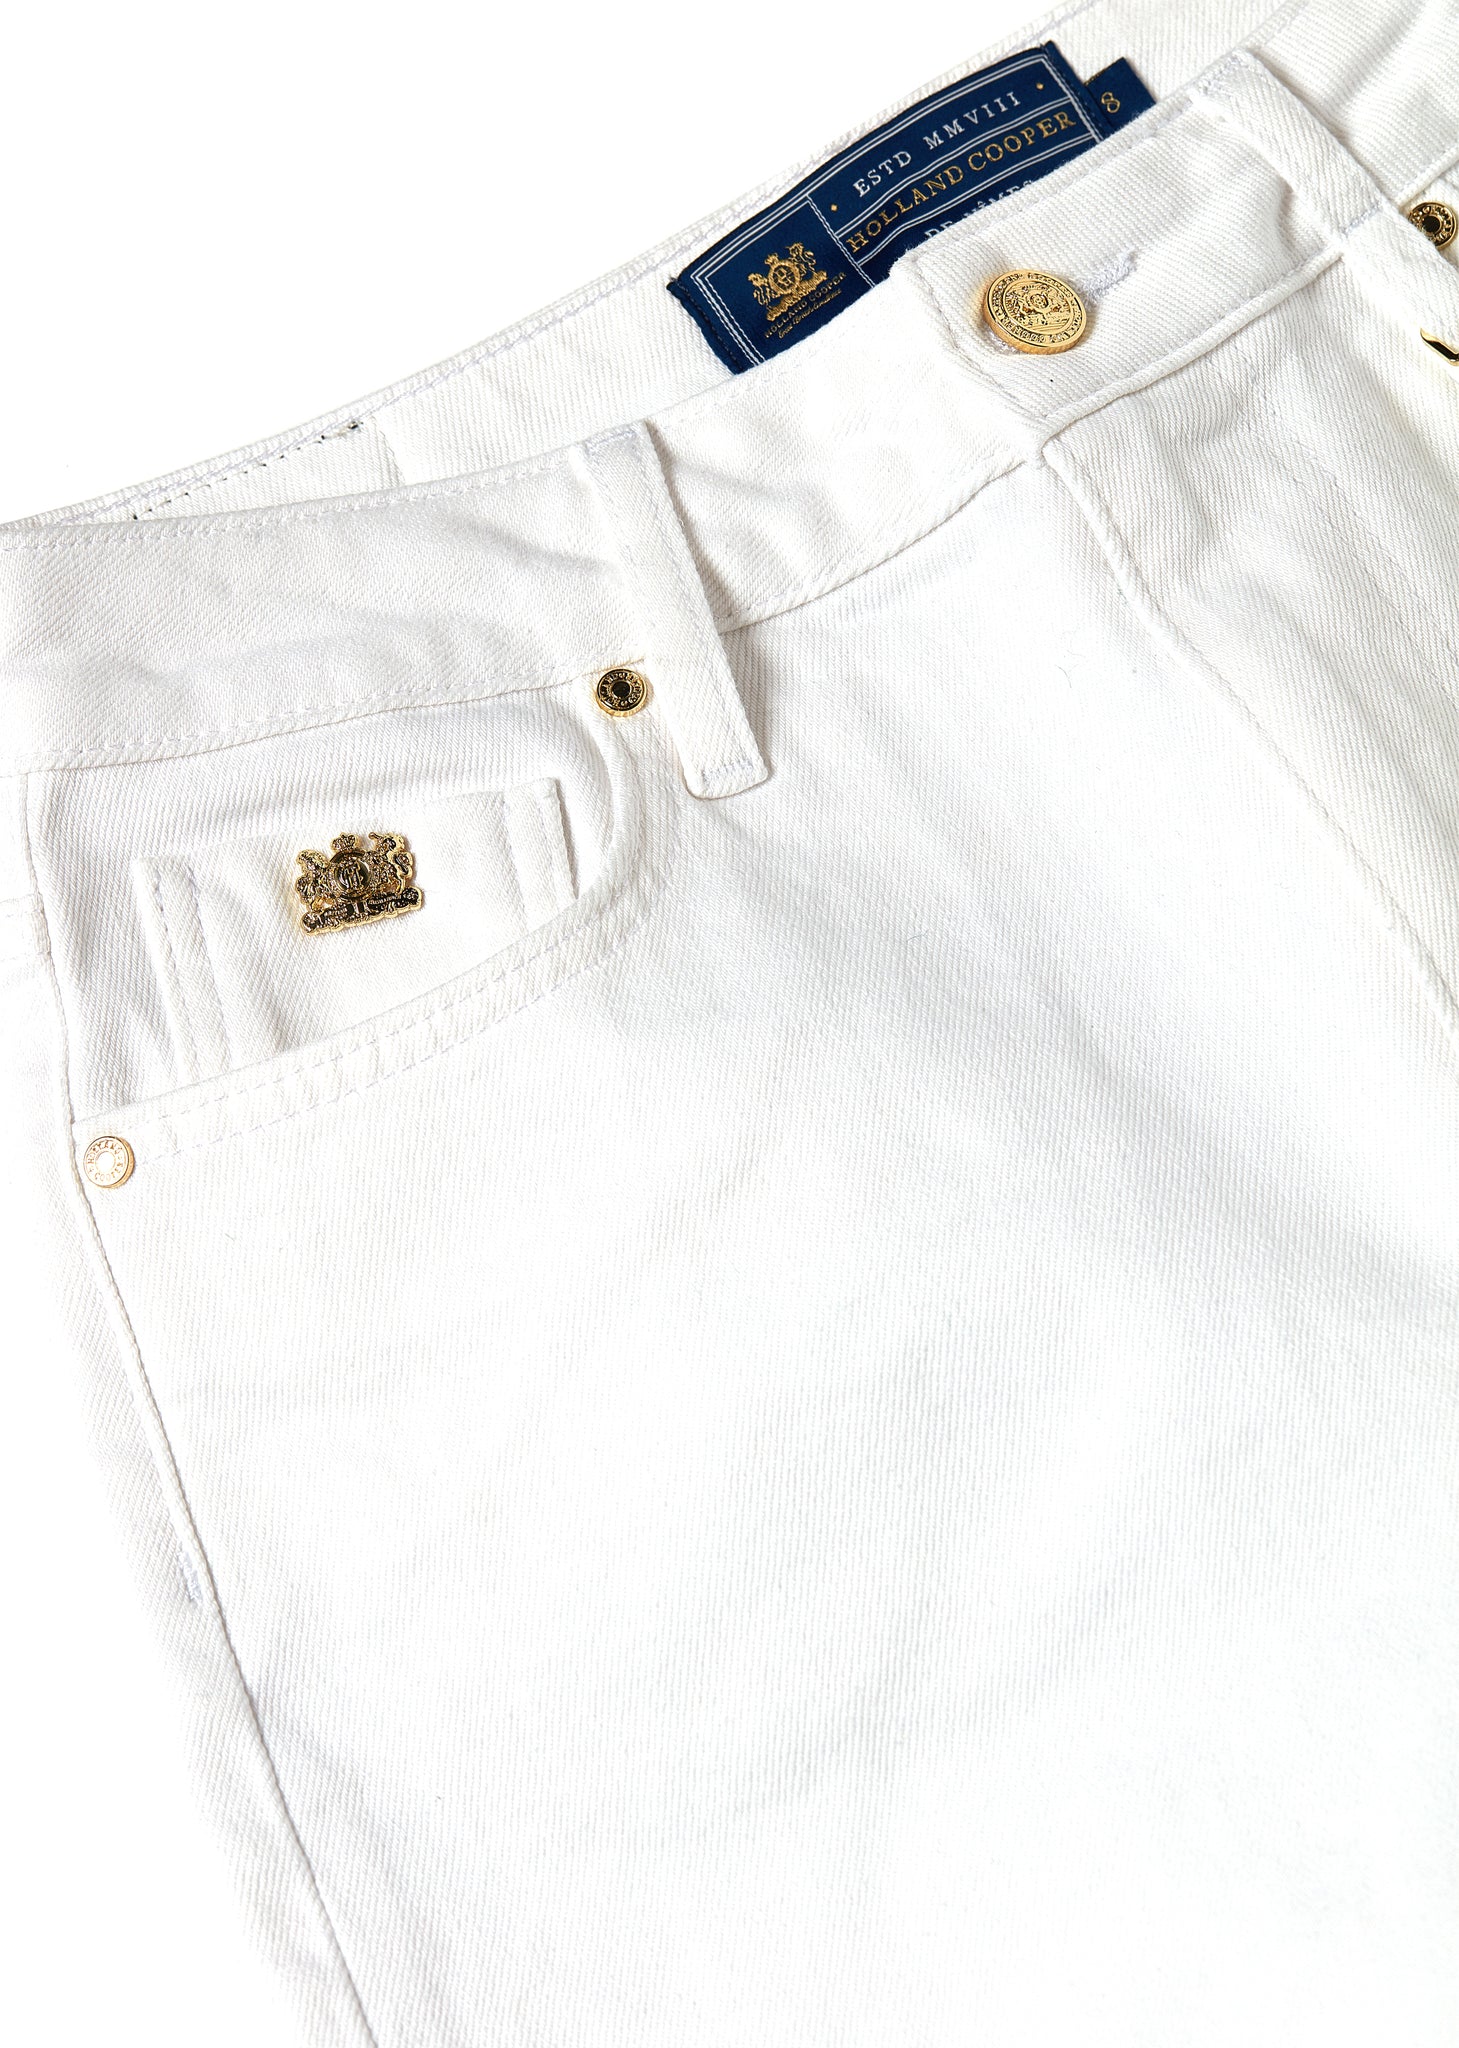 front pocket detail of womens white high waisted denim shorts with raw edge hemline and two open front pockets and two open back pockets with gold hc crest rivet in right front pocket